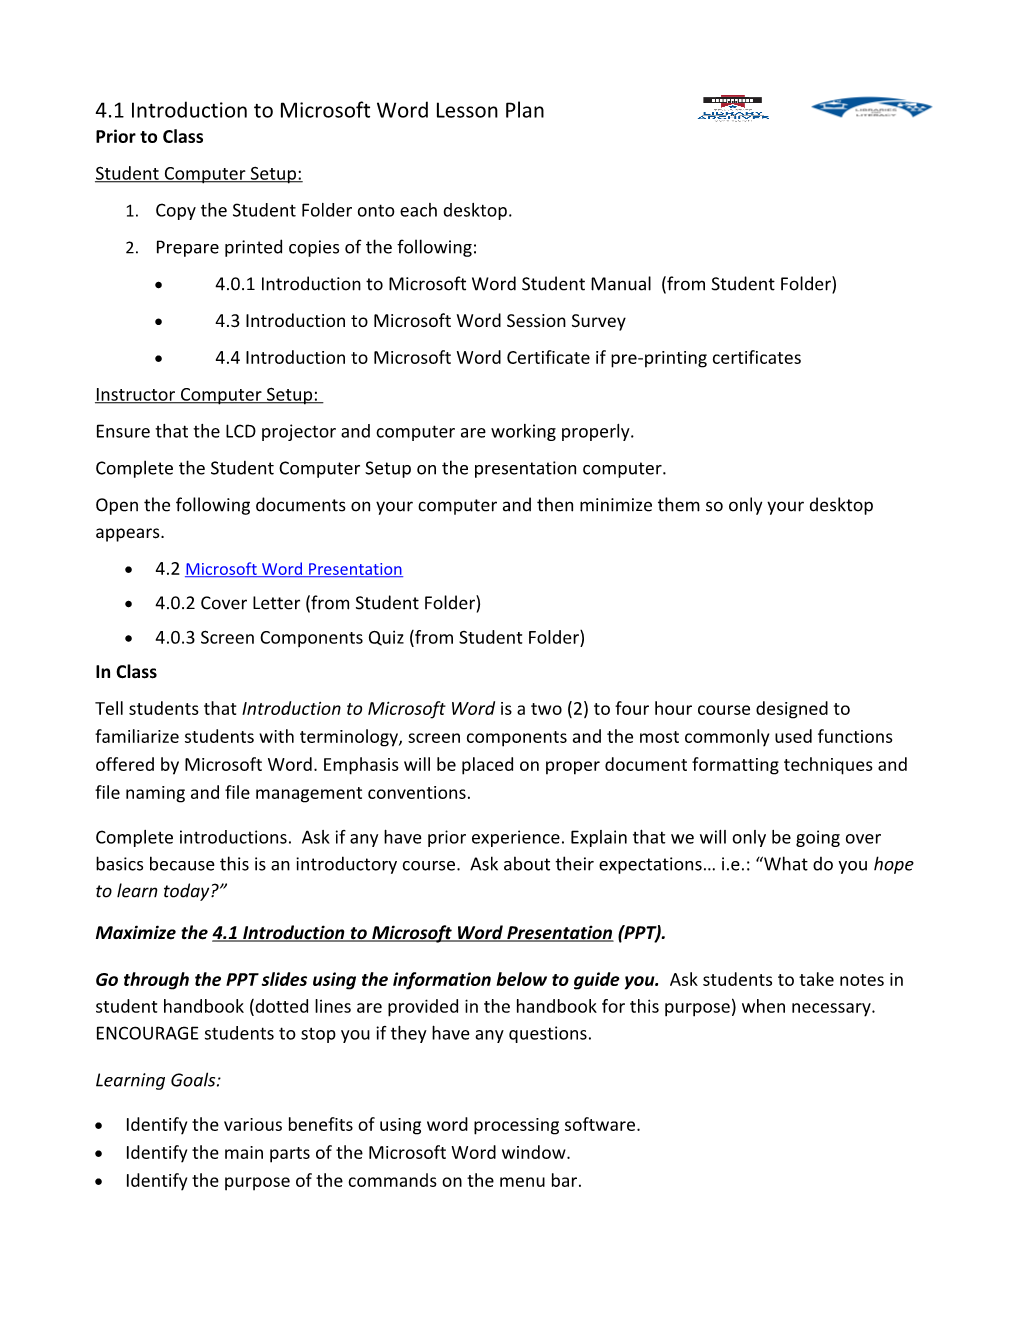 4.1 Introduction to Microsoft Word Lesson Plan